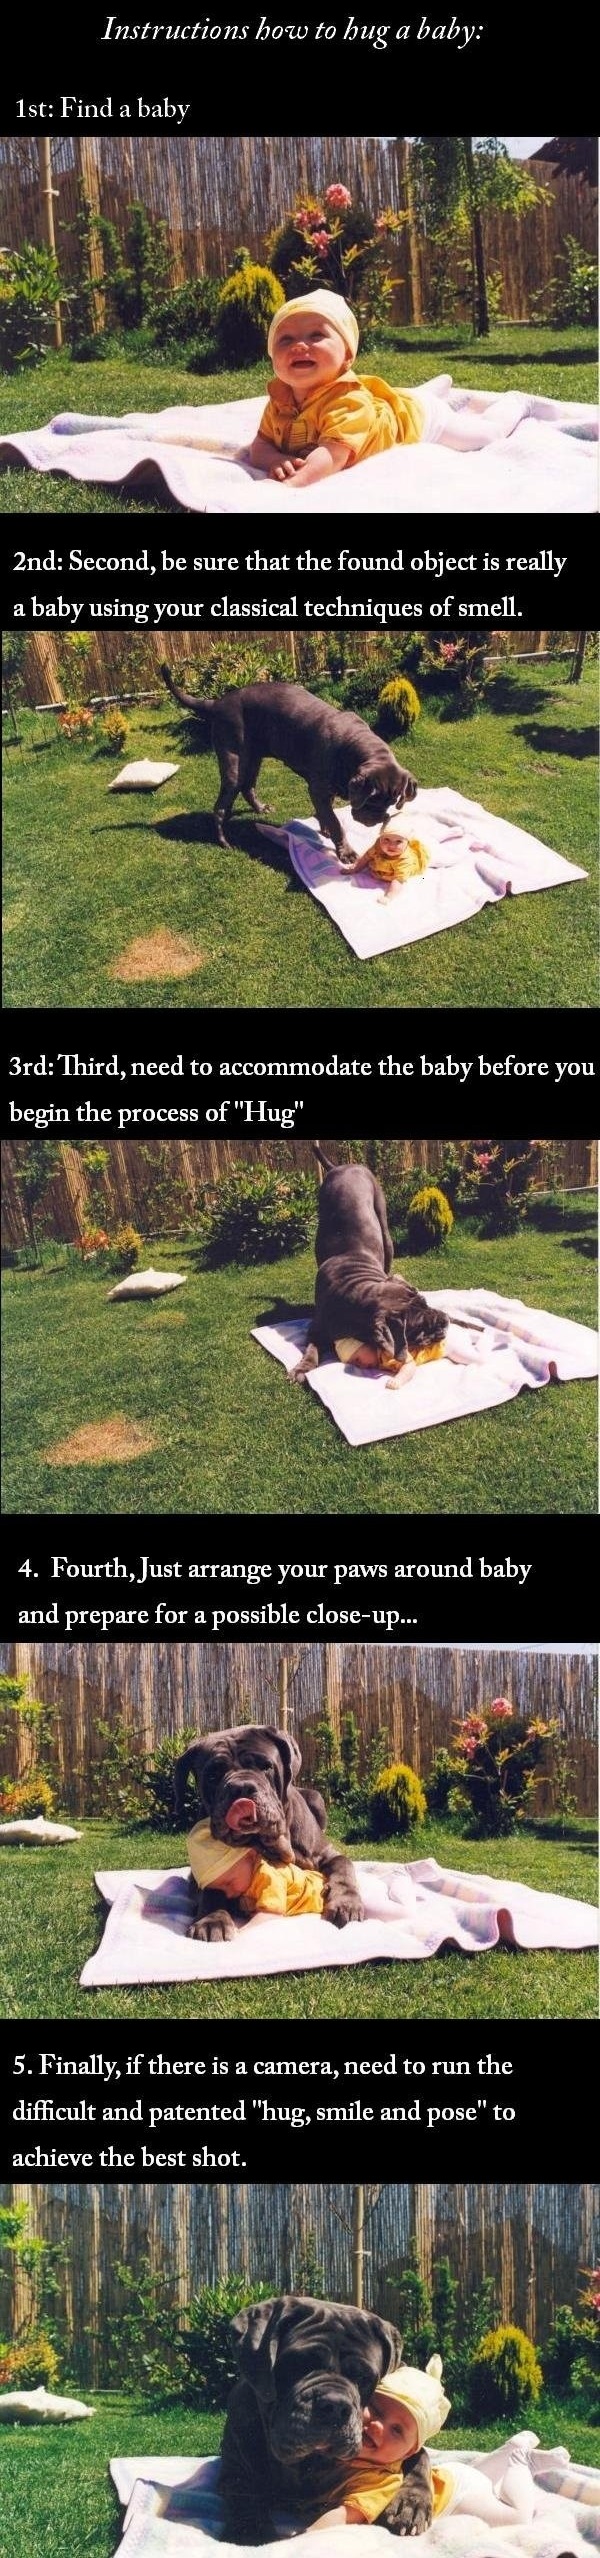 how to hug a baby, a guide for dogs, cute